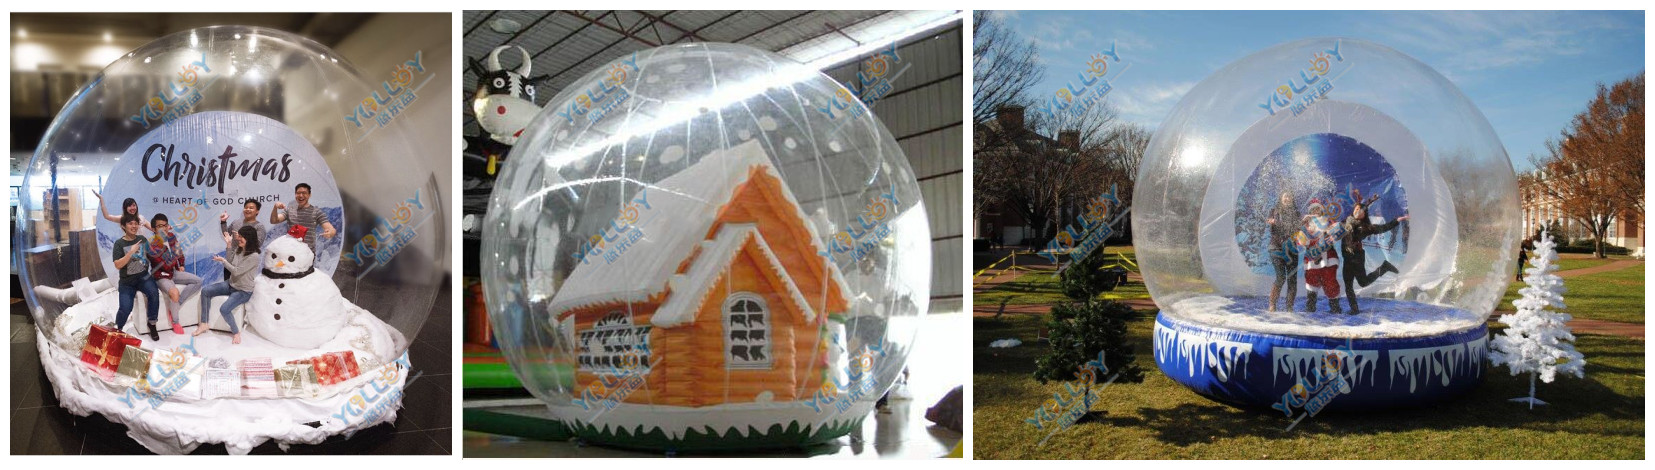 Inflatable performer snow globe